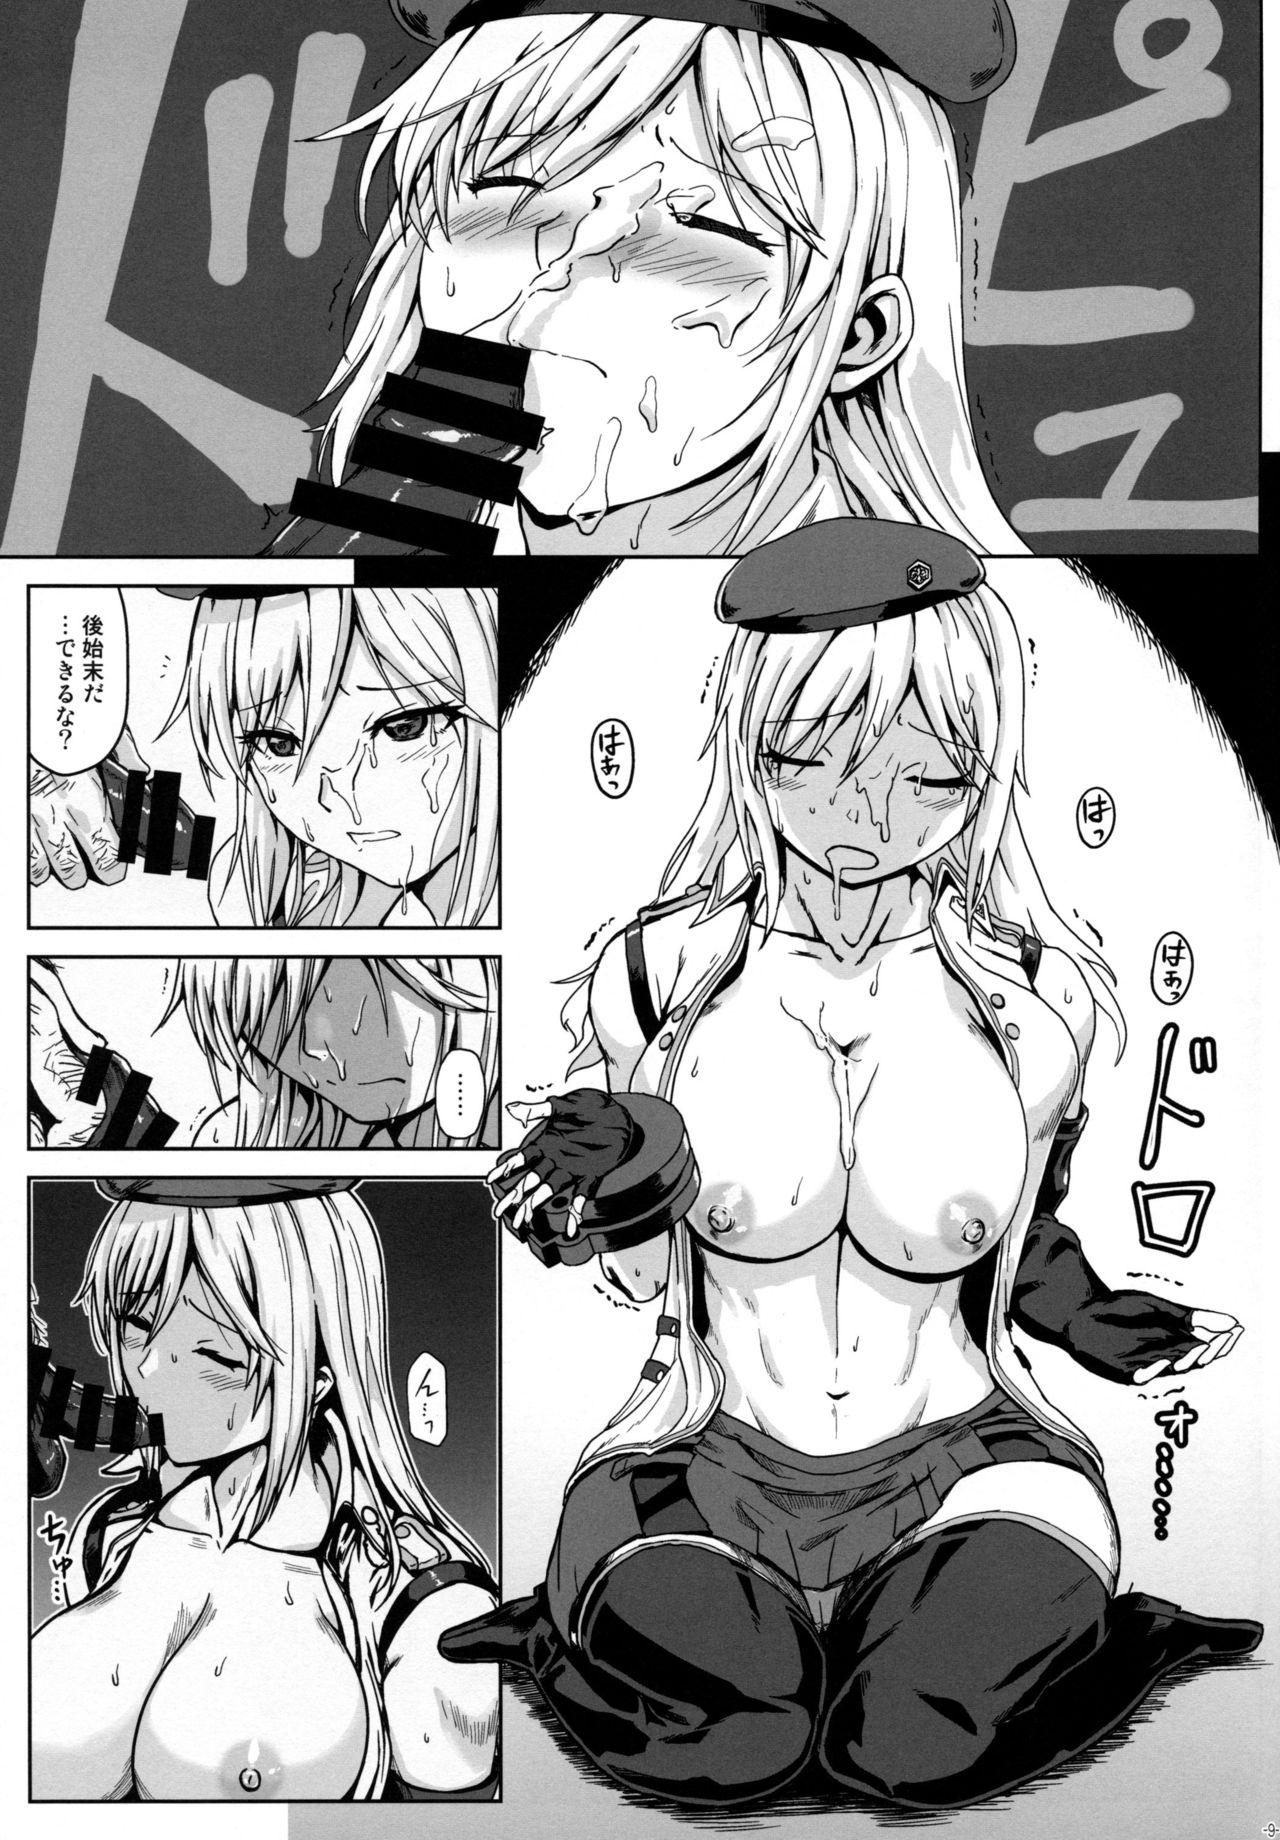 Real Couple (C97) [Lithium (Uchiga)] Again #7 "The Banquet of Madness (Mae)" (God Eater) - God eater Transvestite - Page 8